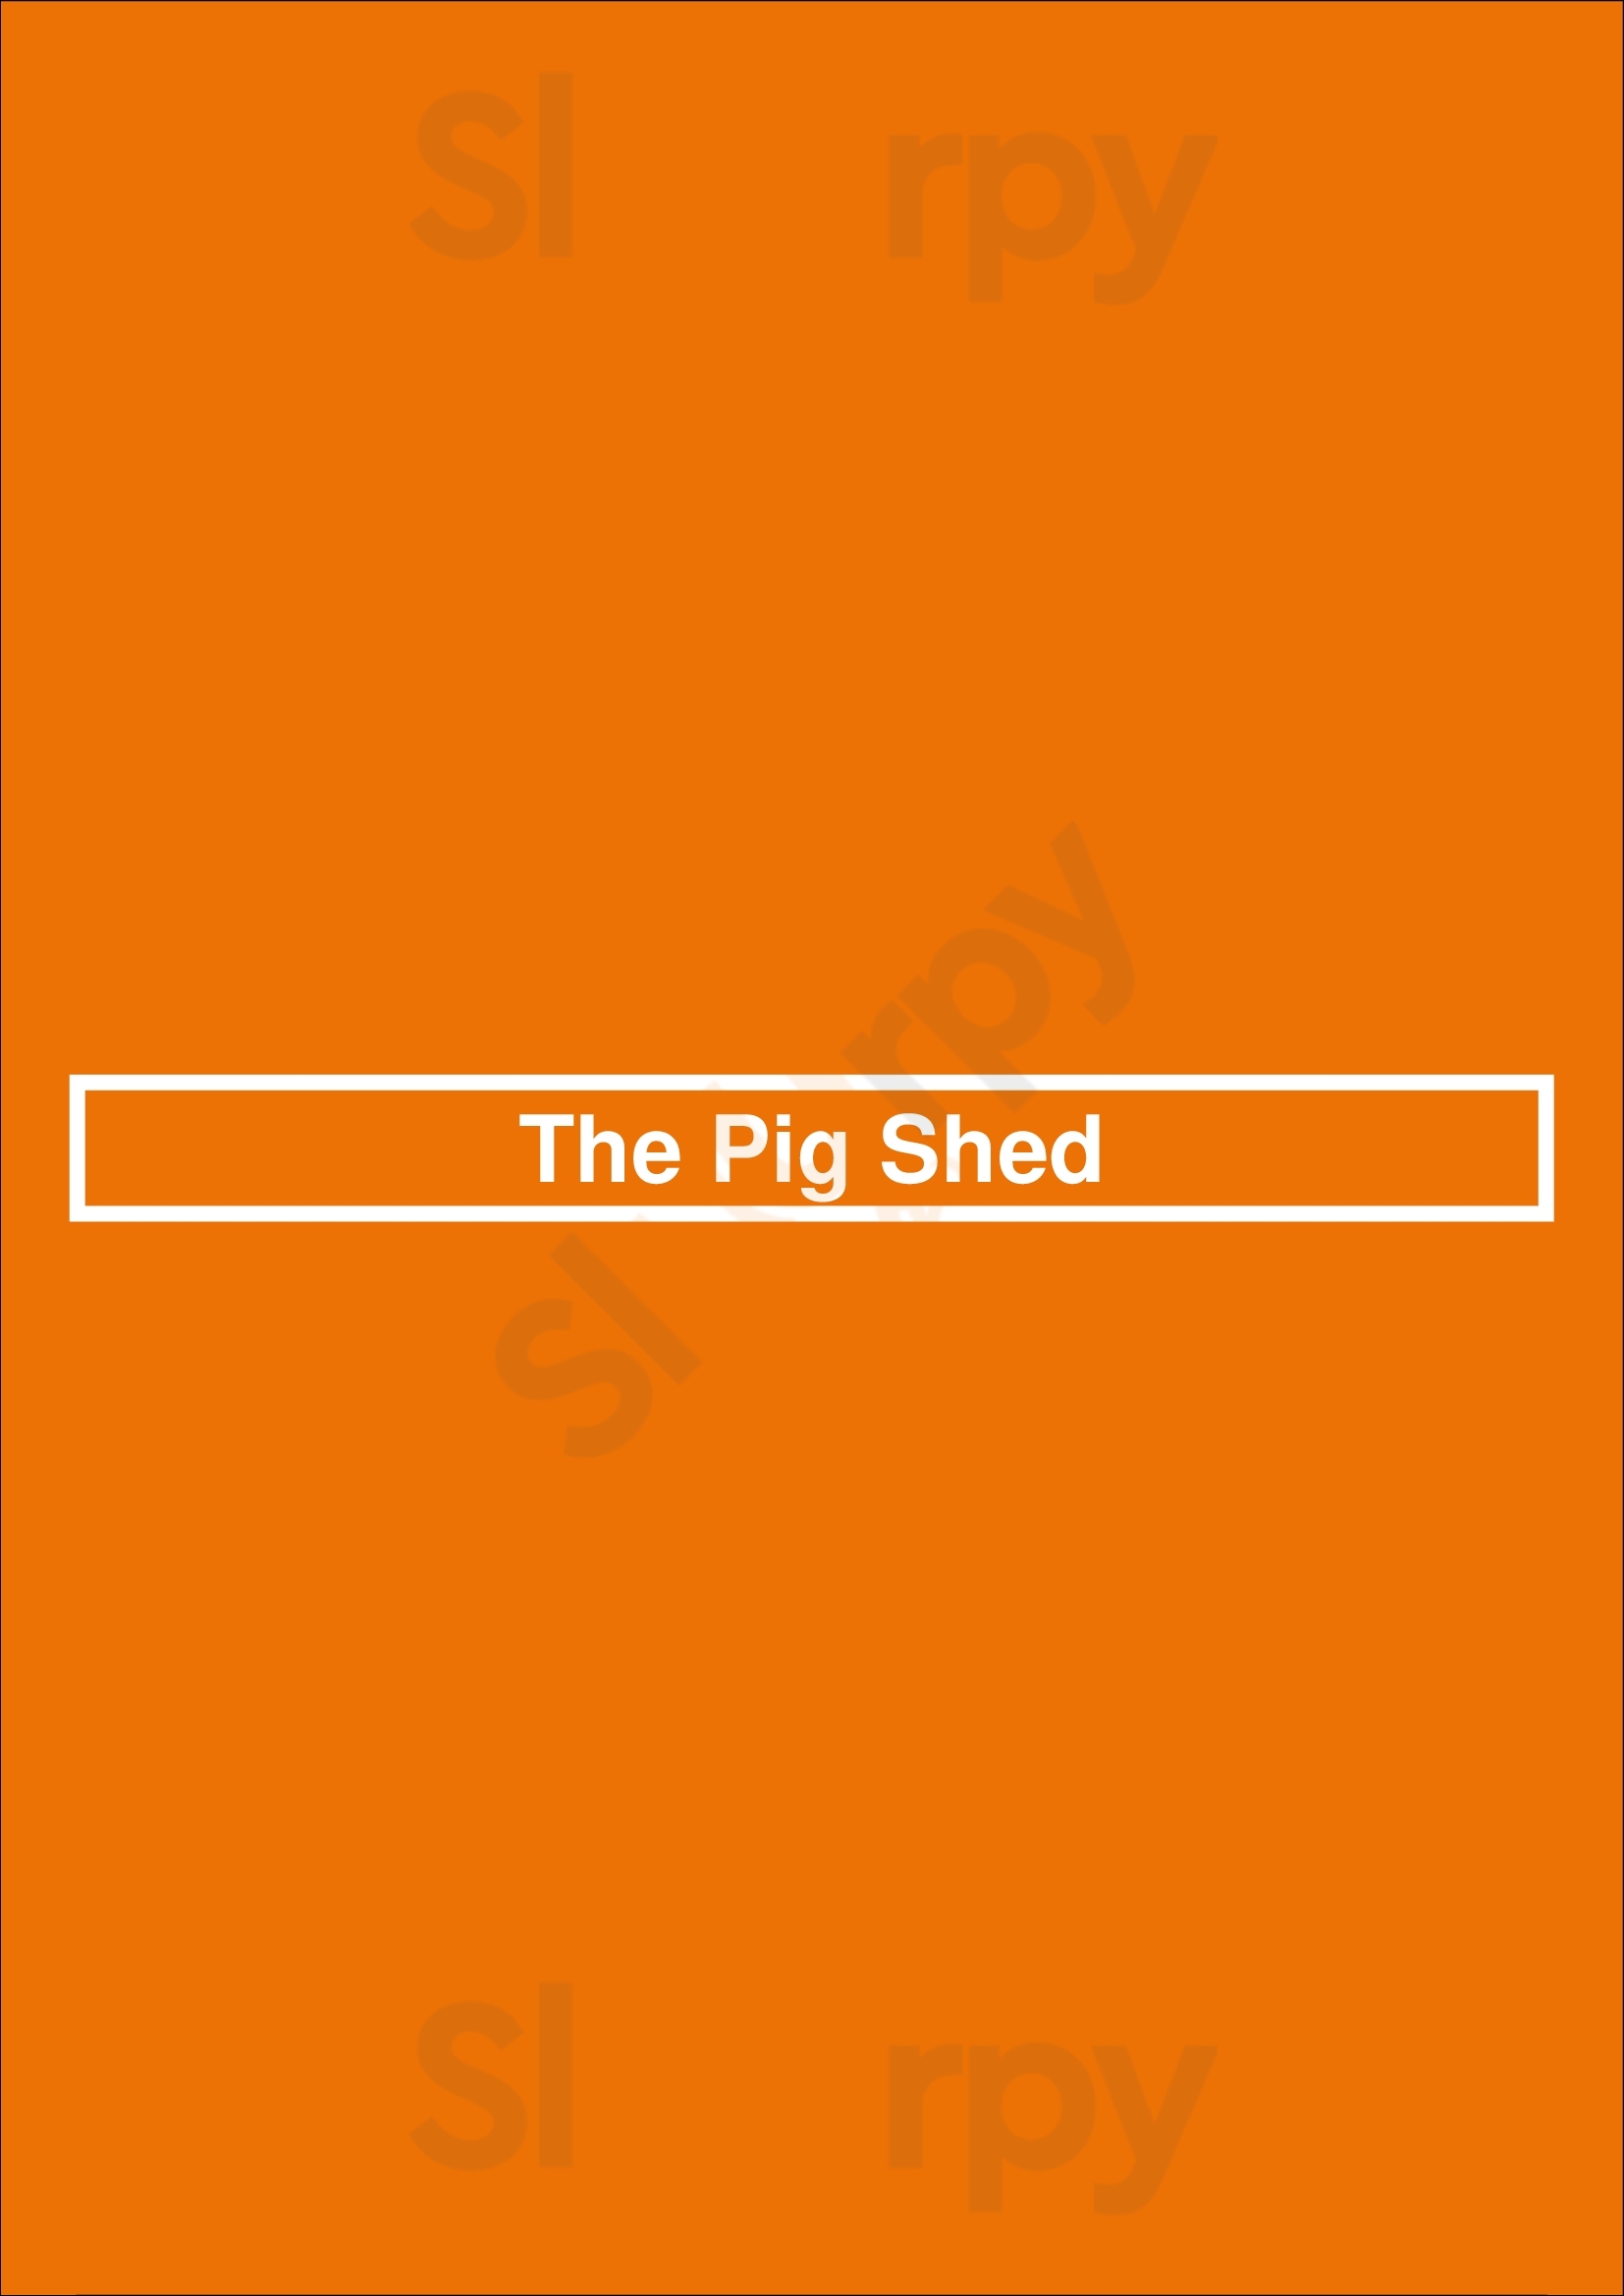 The Pig Shed Liverpool Menu - 1